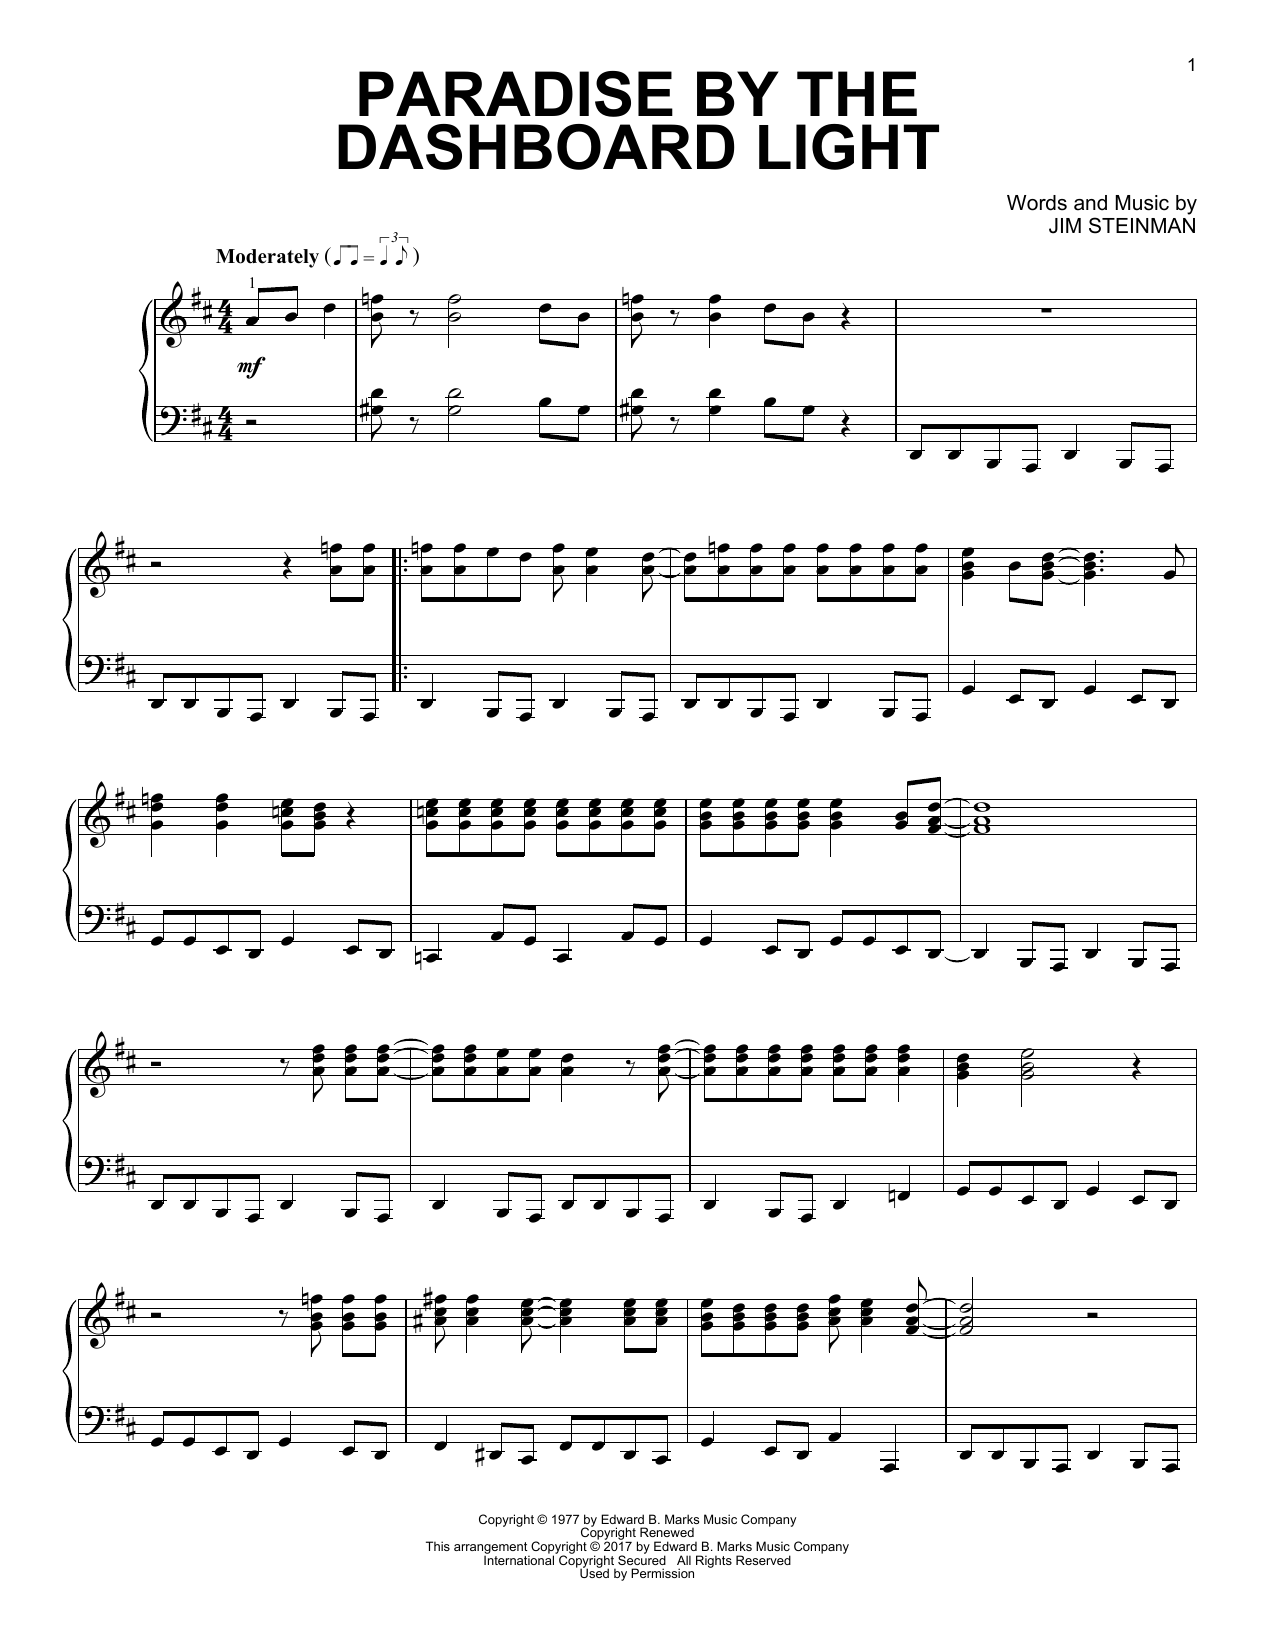 Meatloaf 'Paradise By The Dashboard Light' Sheet Music Notes, Cho...